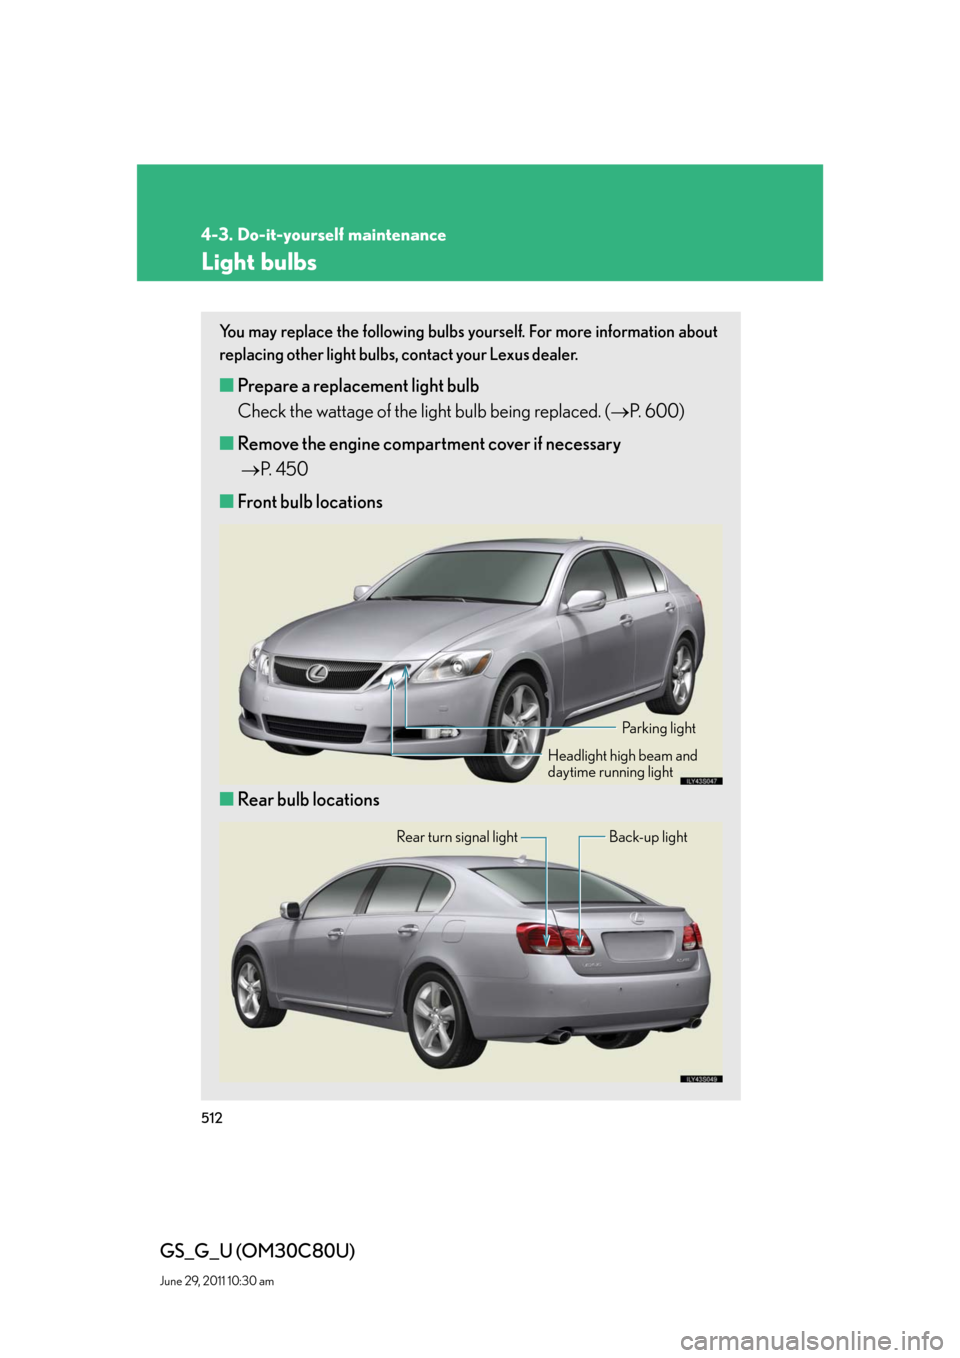 Lexus GS350 2010  Do-It-Yourself Maintenance / LEXUS 2010 GS460 GS350 OWNERS MANUAL (OM30C80U) 512
4-3. Do-it-yourself maintenance
GS_G_U (OM30C80U)
June 29, 2011 10:30 am
Light bulbs
You may replace the following bulbs yourself. For more information about 
replacing other light bulbs, contact 